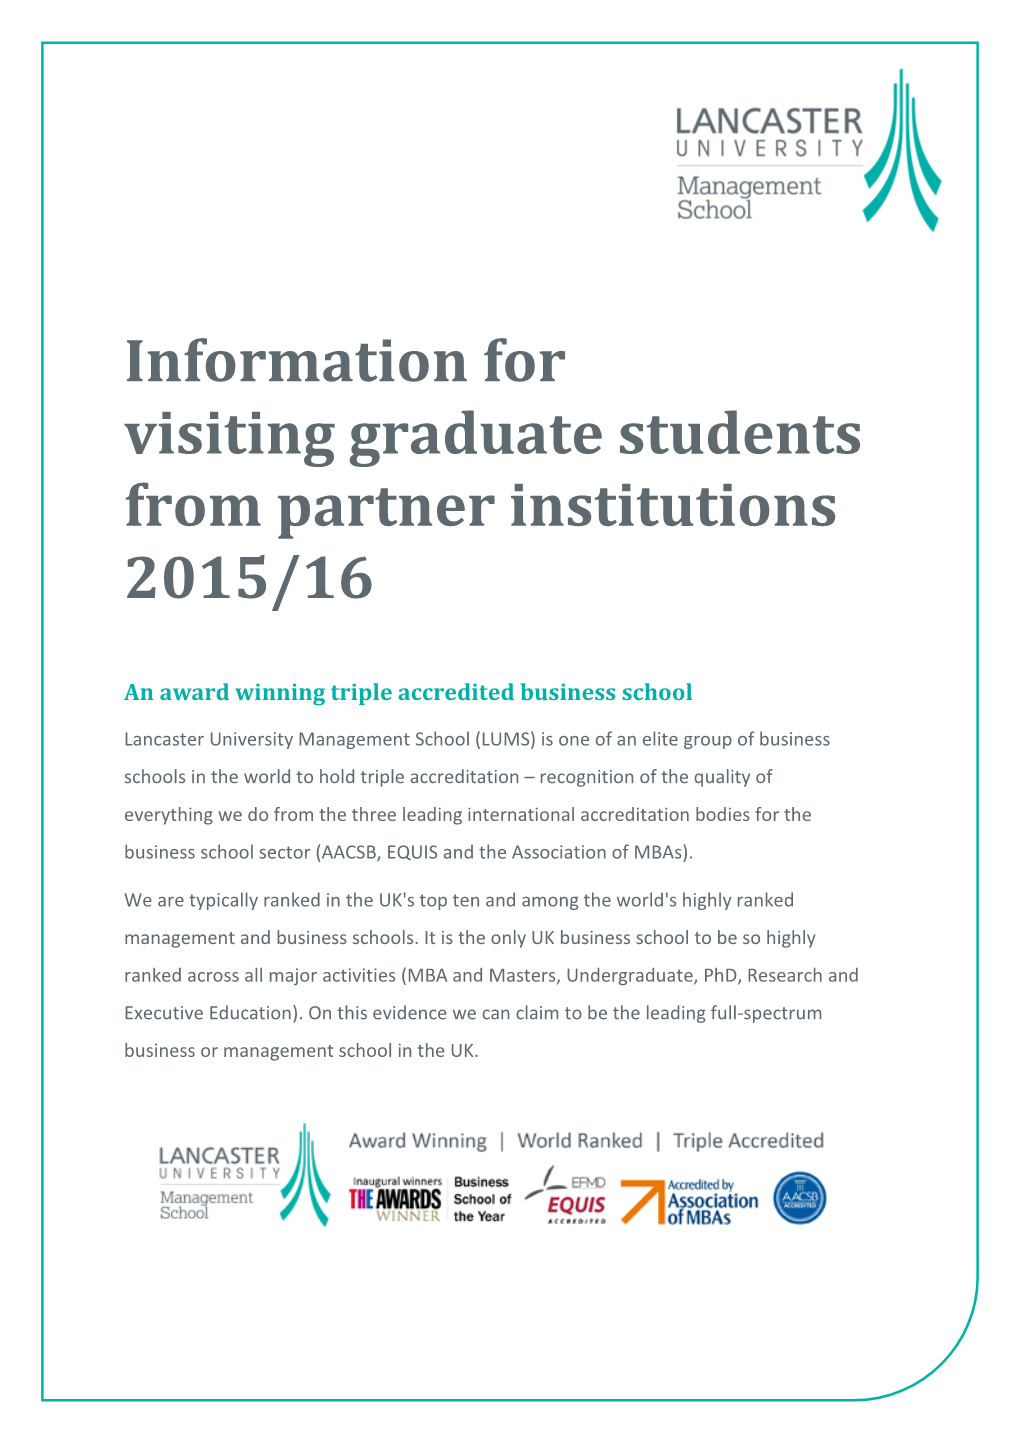 Information for Visiting Graduate Students from Partner Institutions 2015/16